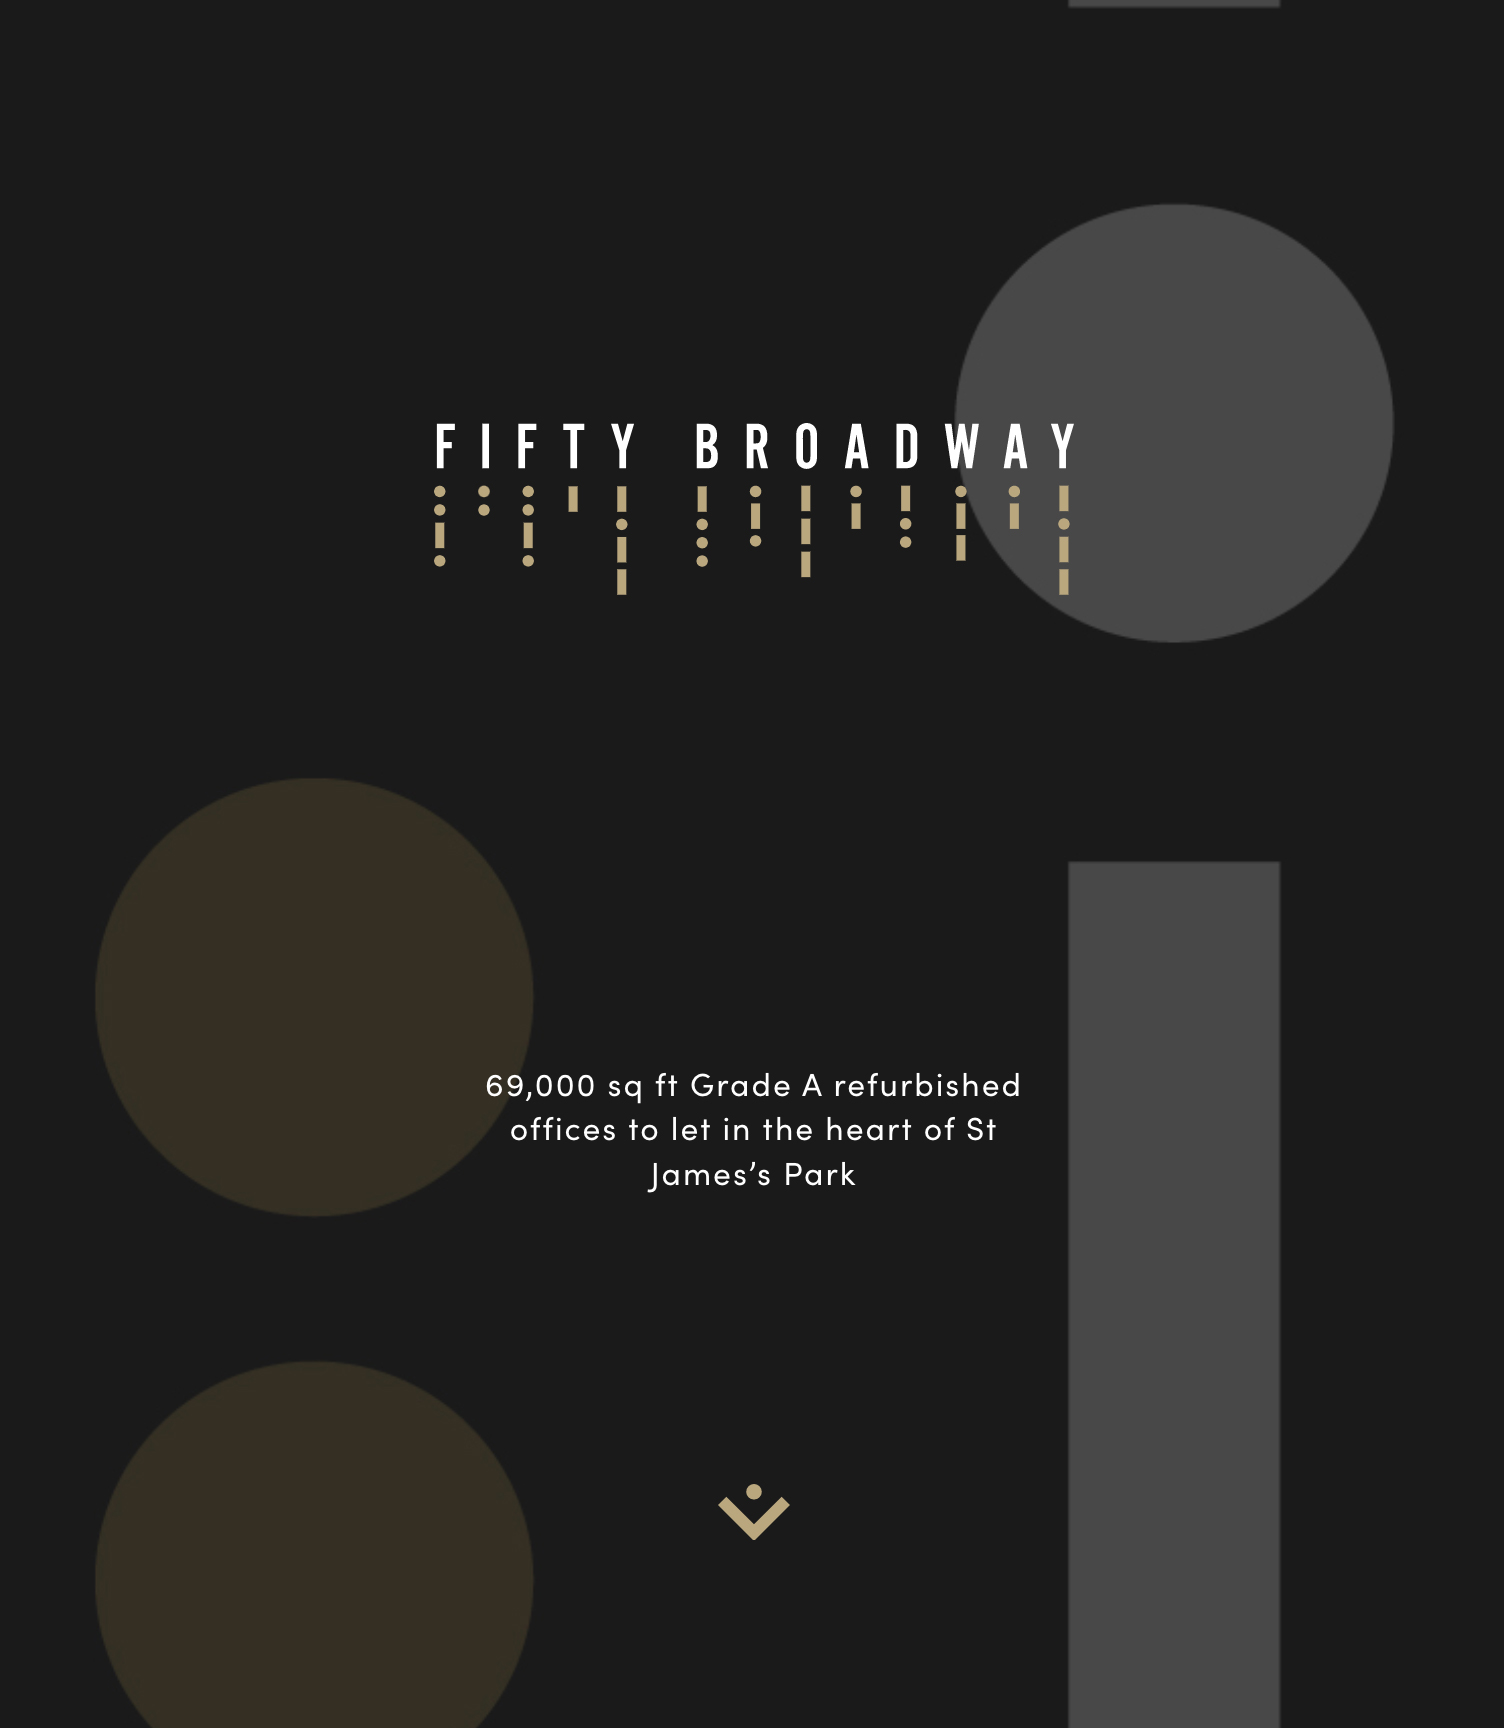 Fifty Broadway is sold